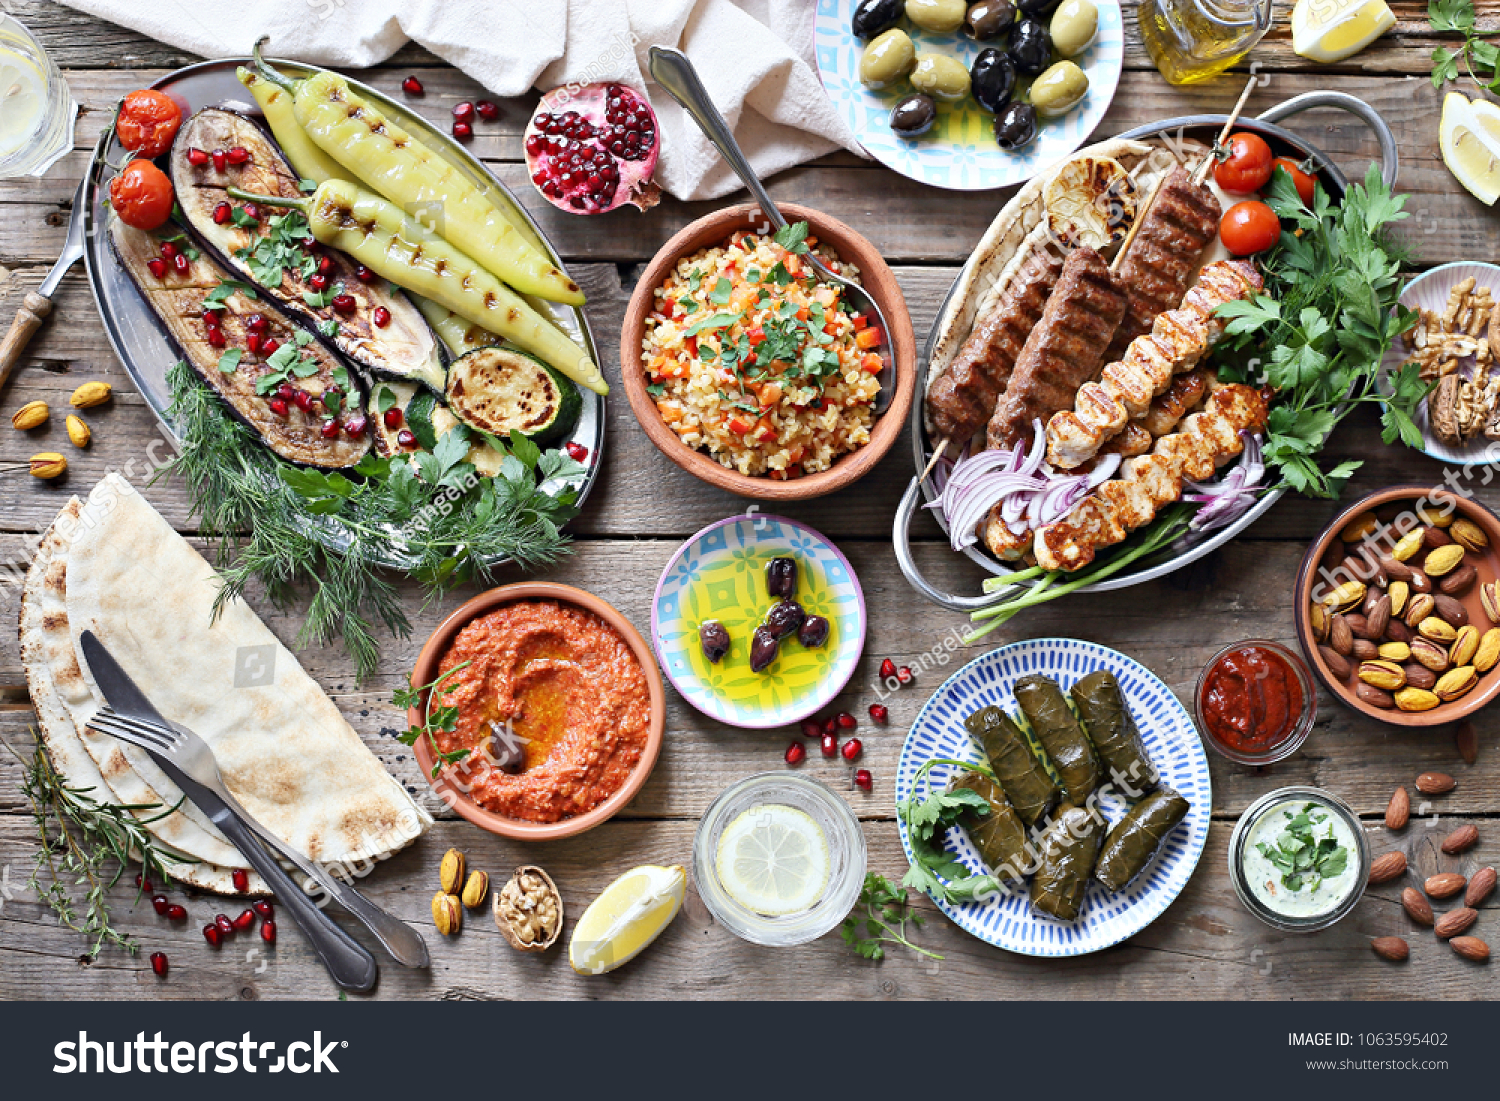 Middle eastern, arabic or mediterranean dinner table with grilled lamb kebab, chicken skewers  with roasted vegetables and appetizers variety serving on rustic outdoor table. Overhead view. #1063595402